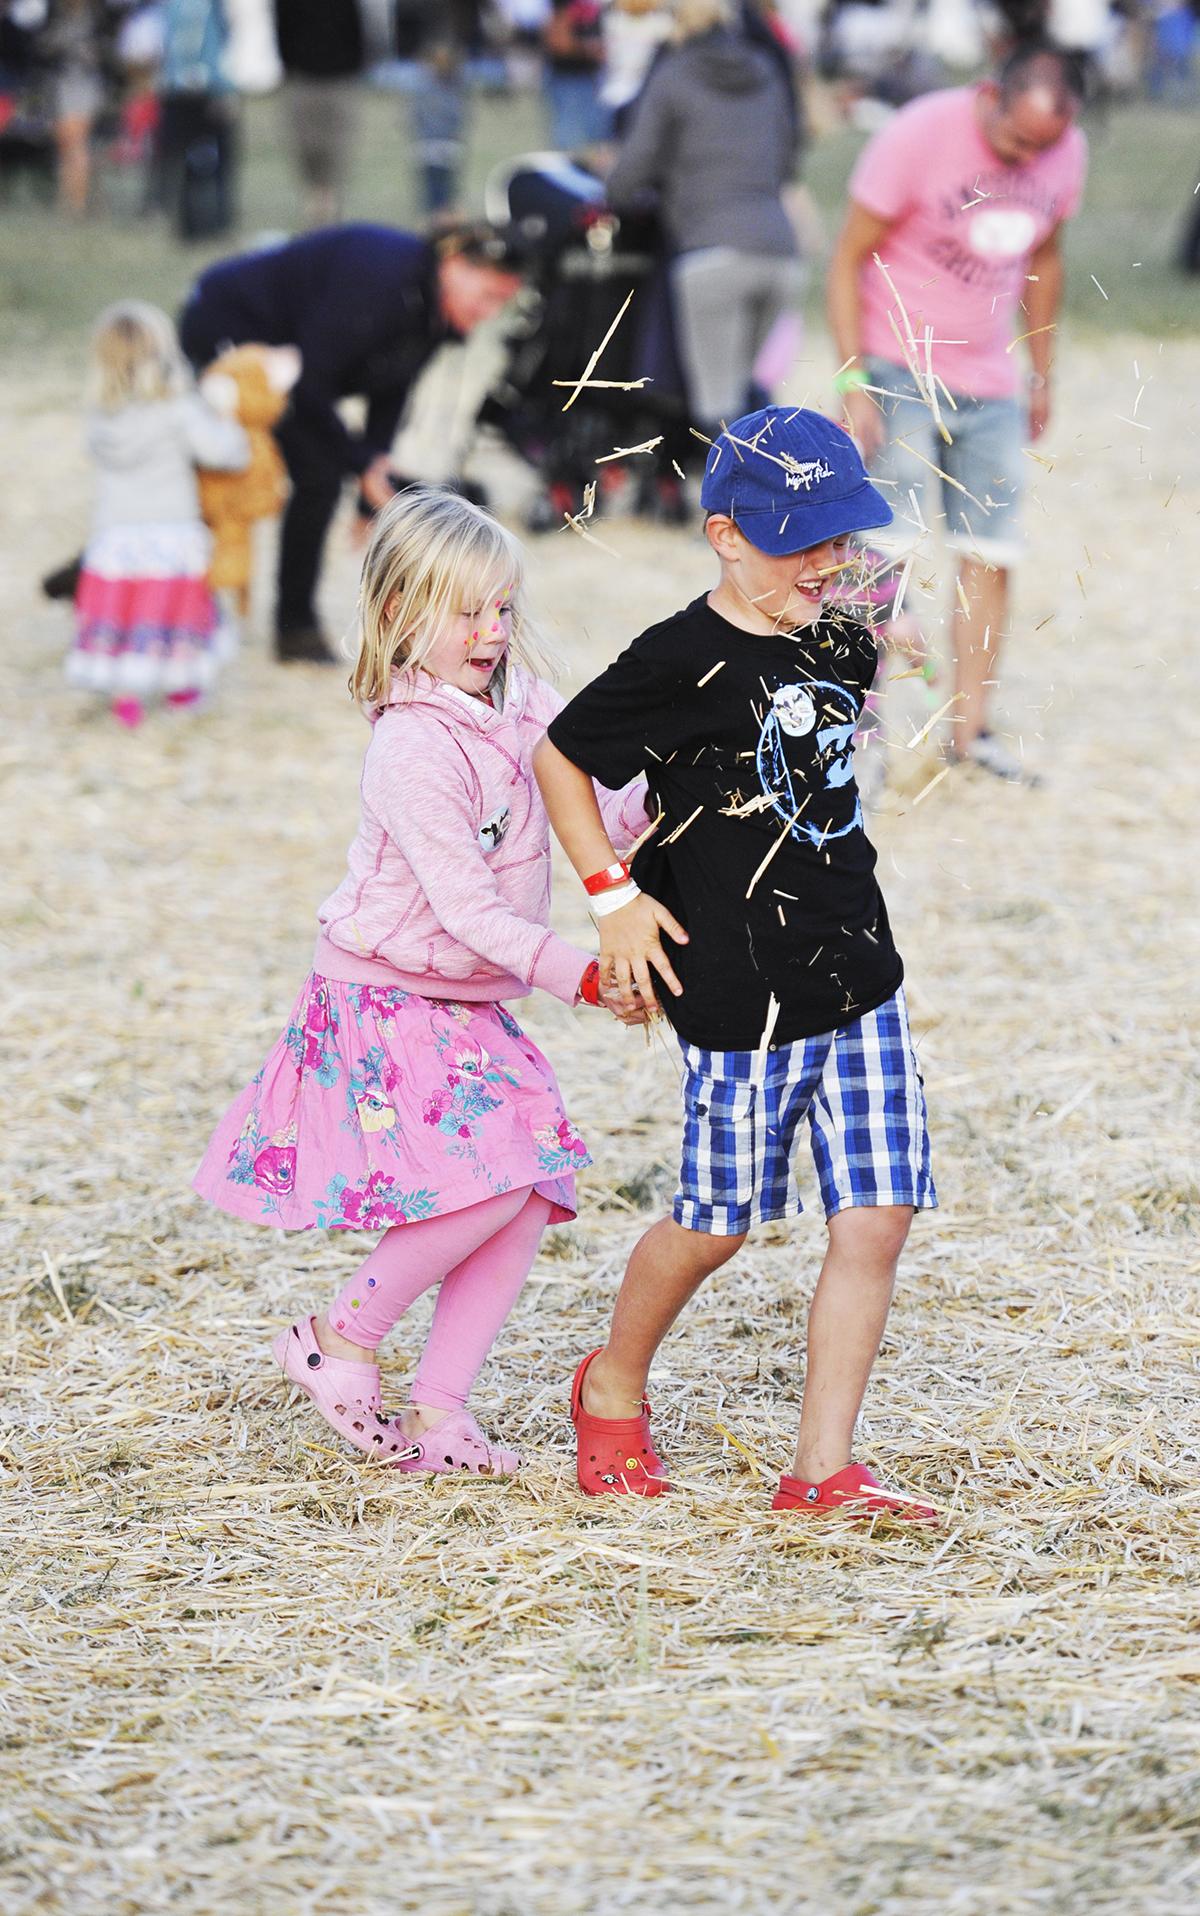 Pictures from the annual Big Feastival from Alex James' Farm in Kingham